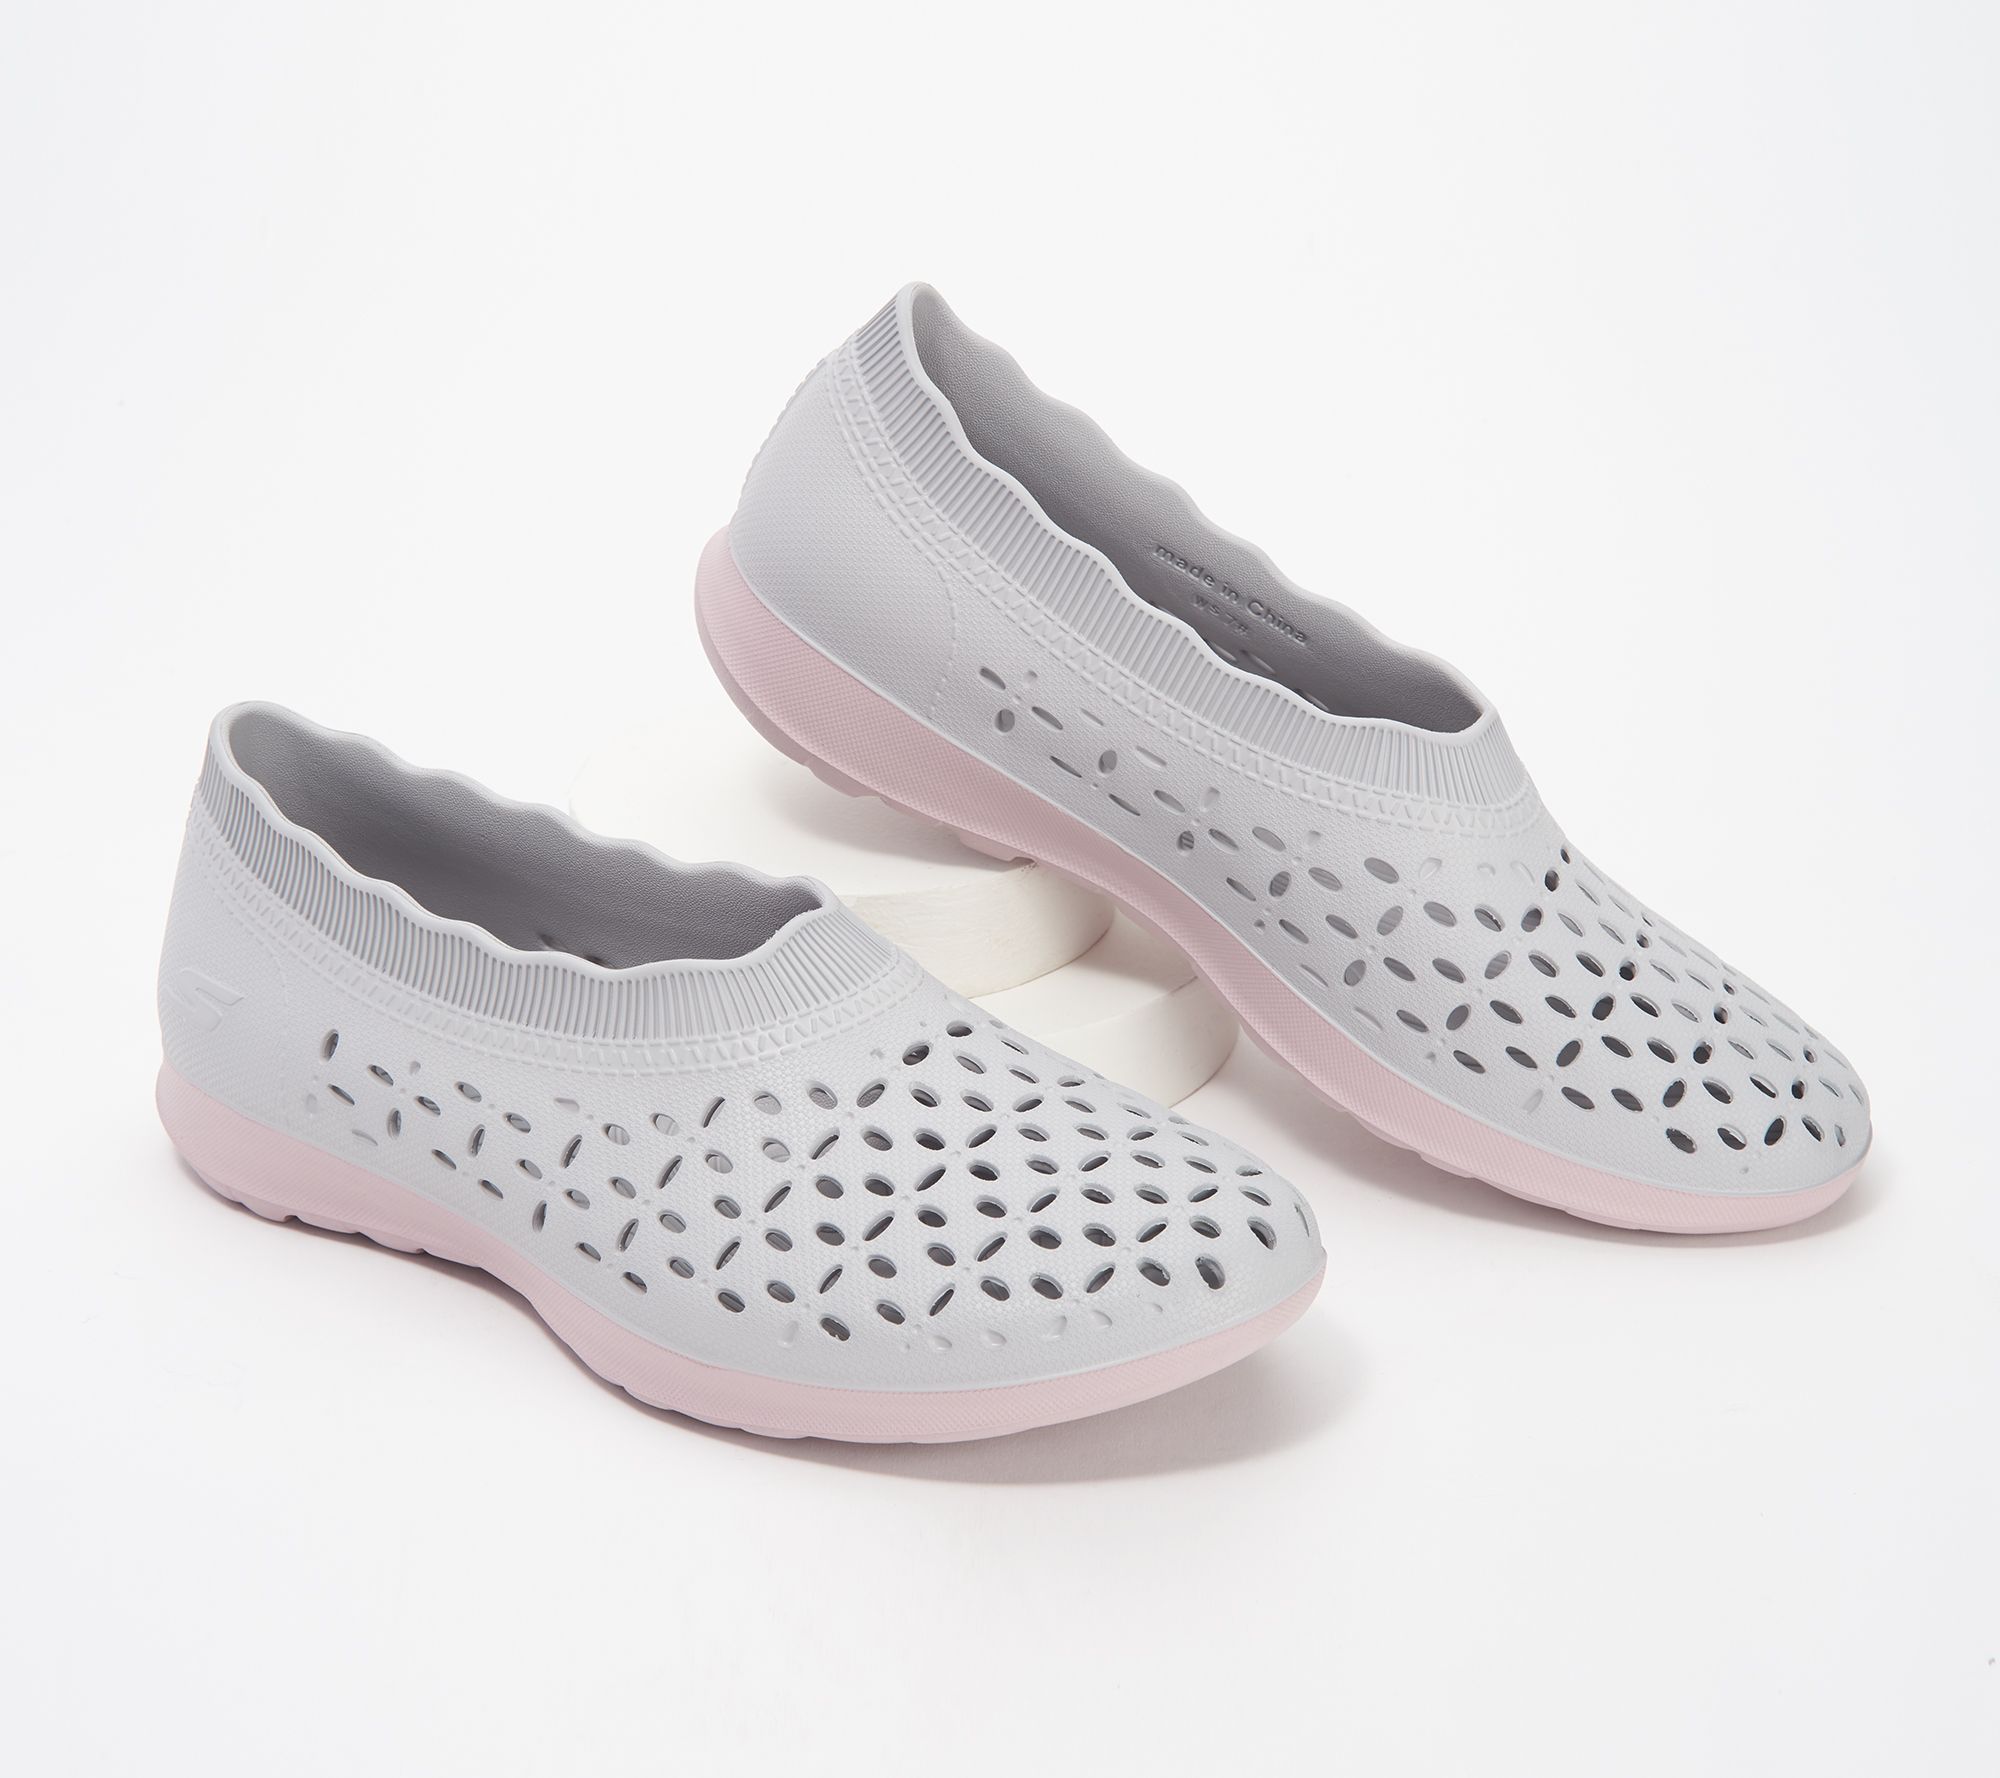 Skechers Perforated Shoes QVC.com